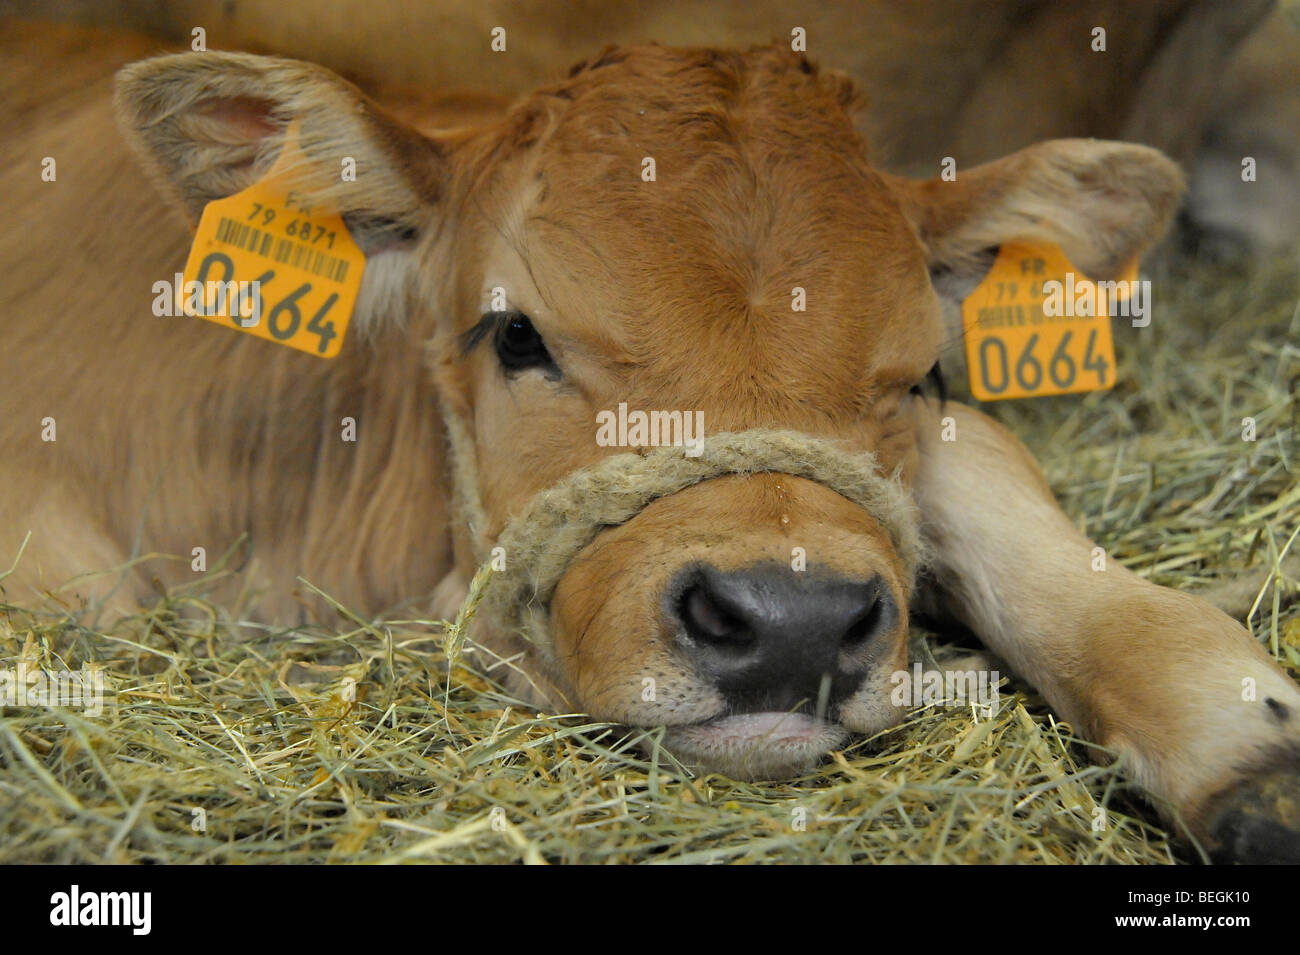 Baby calf on display at the cattle livestock show in Parthenay, Deux-Sevres, France. Stock Photo